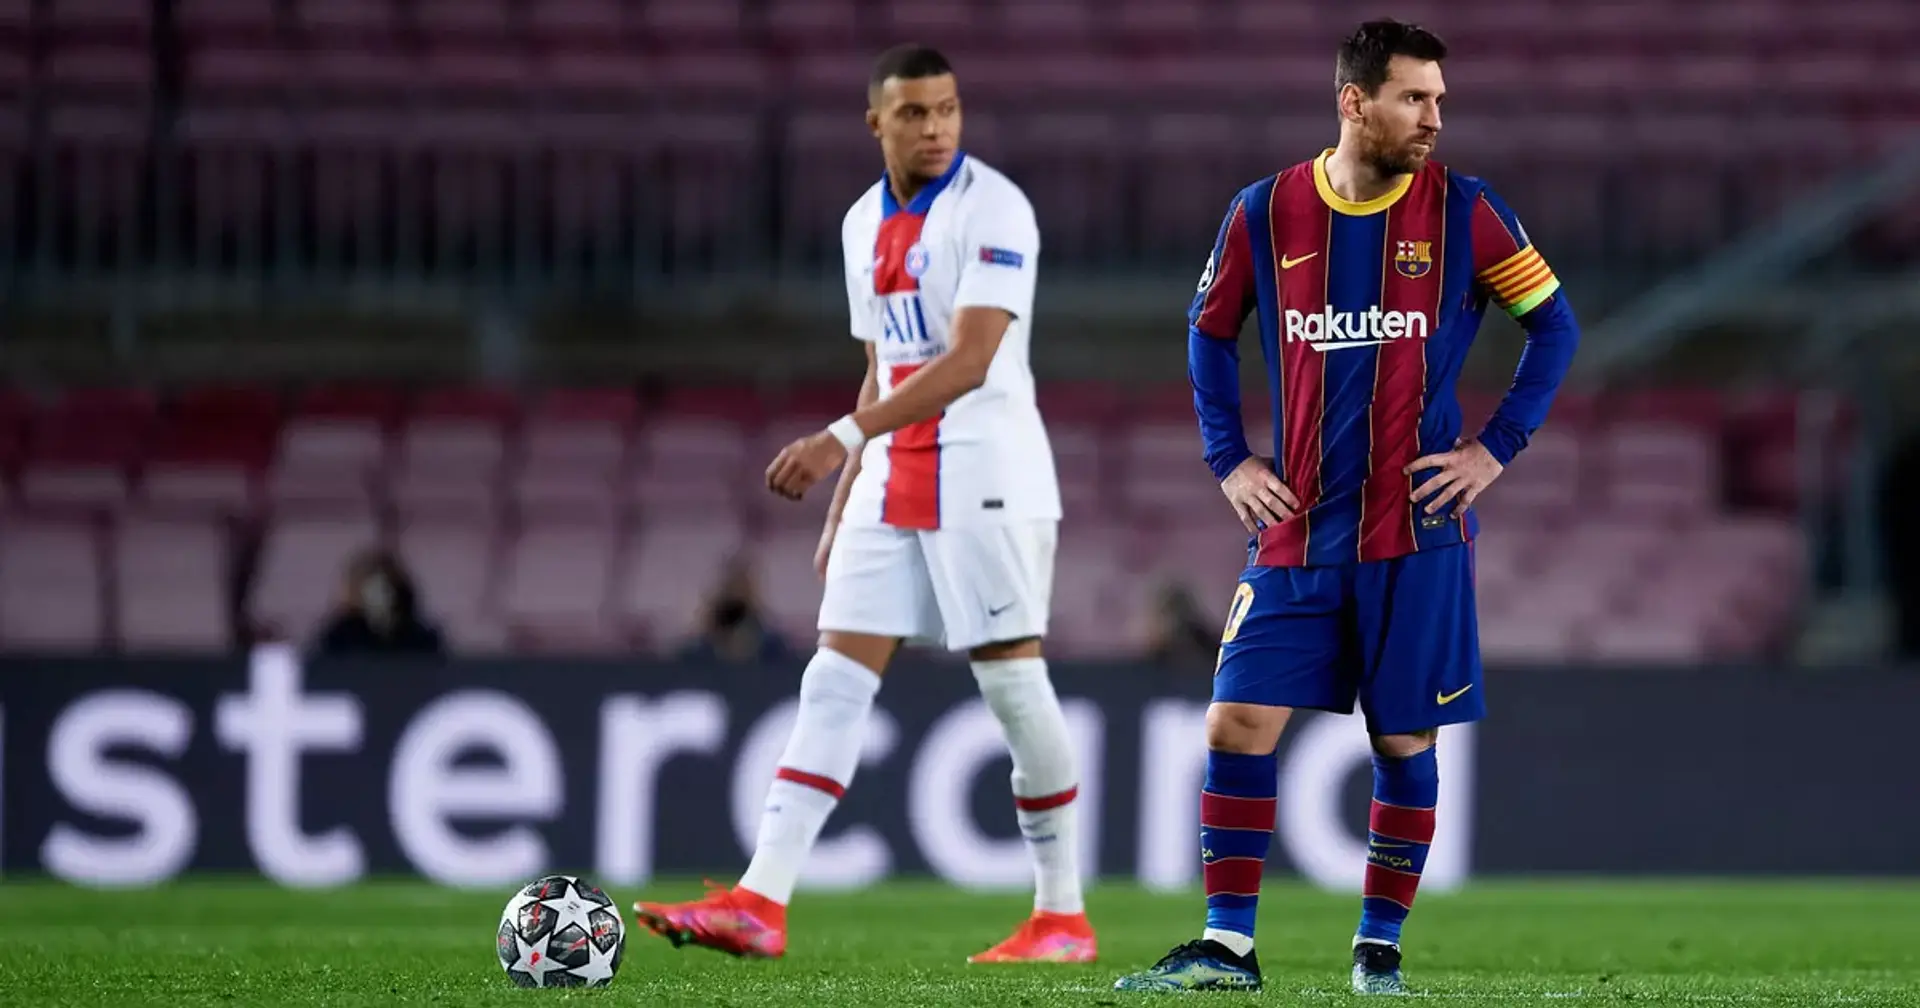 Revealed: 1 unwanted trend Barcelona will be hoping to break at PSG to reach CL quarter-finals